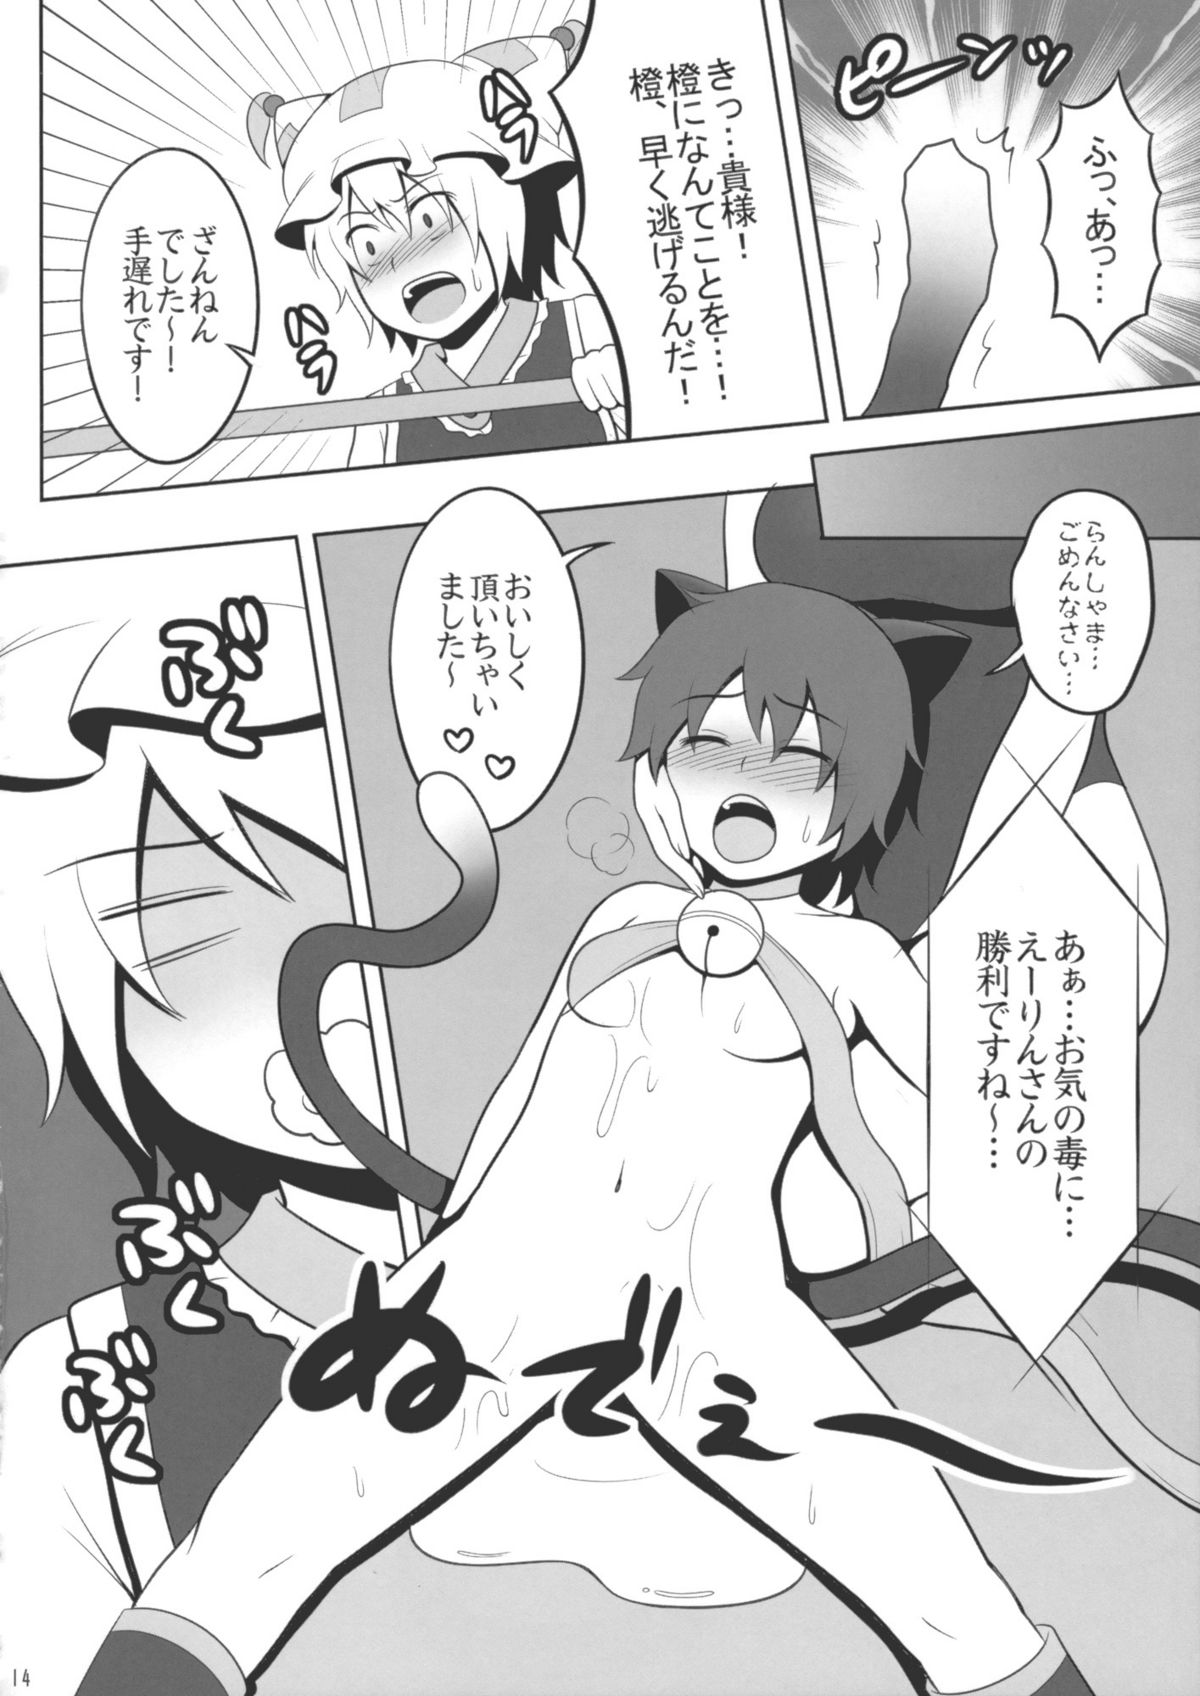 [Syounen Byoukan] Touhou Catfight 4 [少年病監] 東方キャットファイトIV